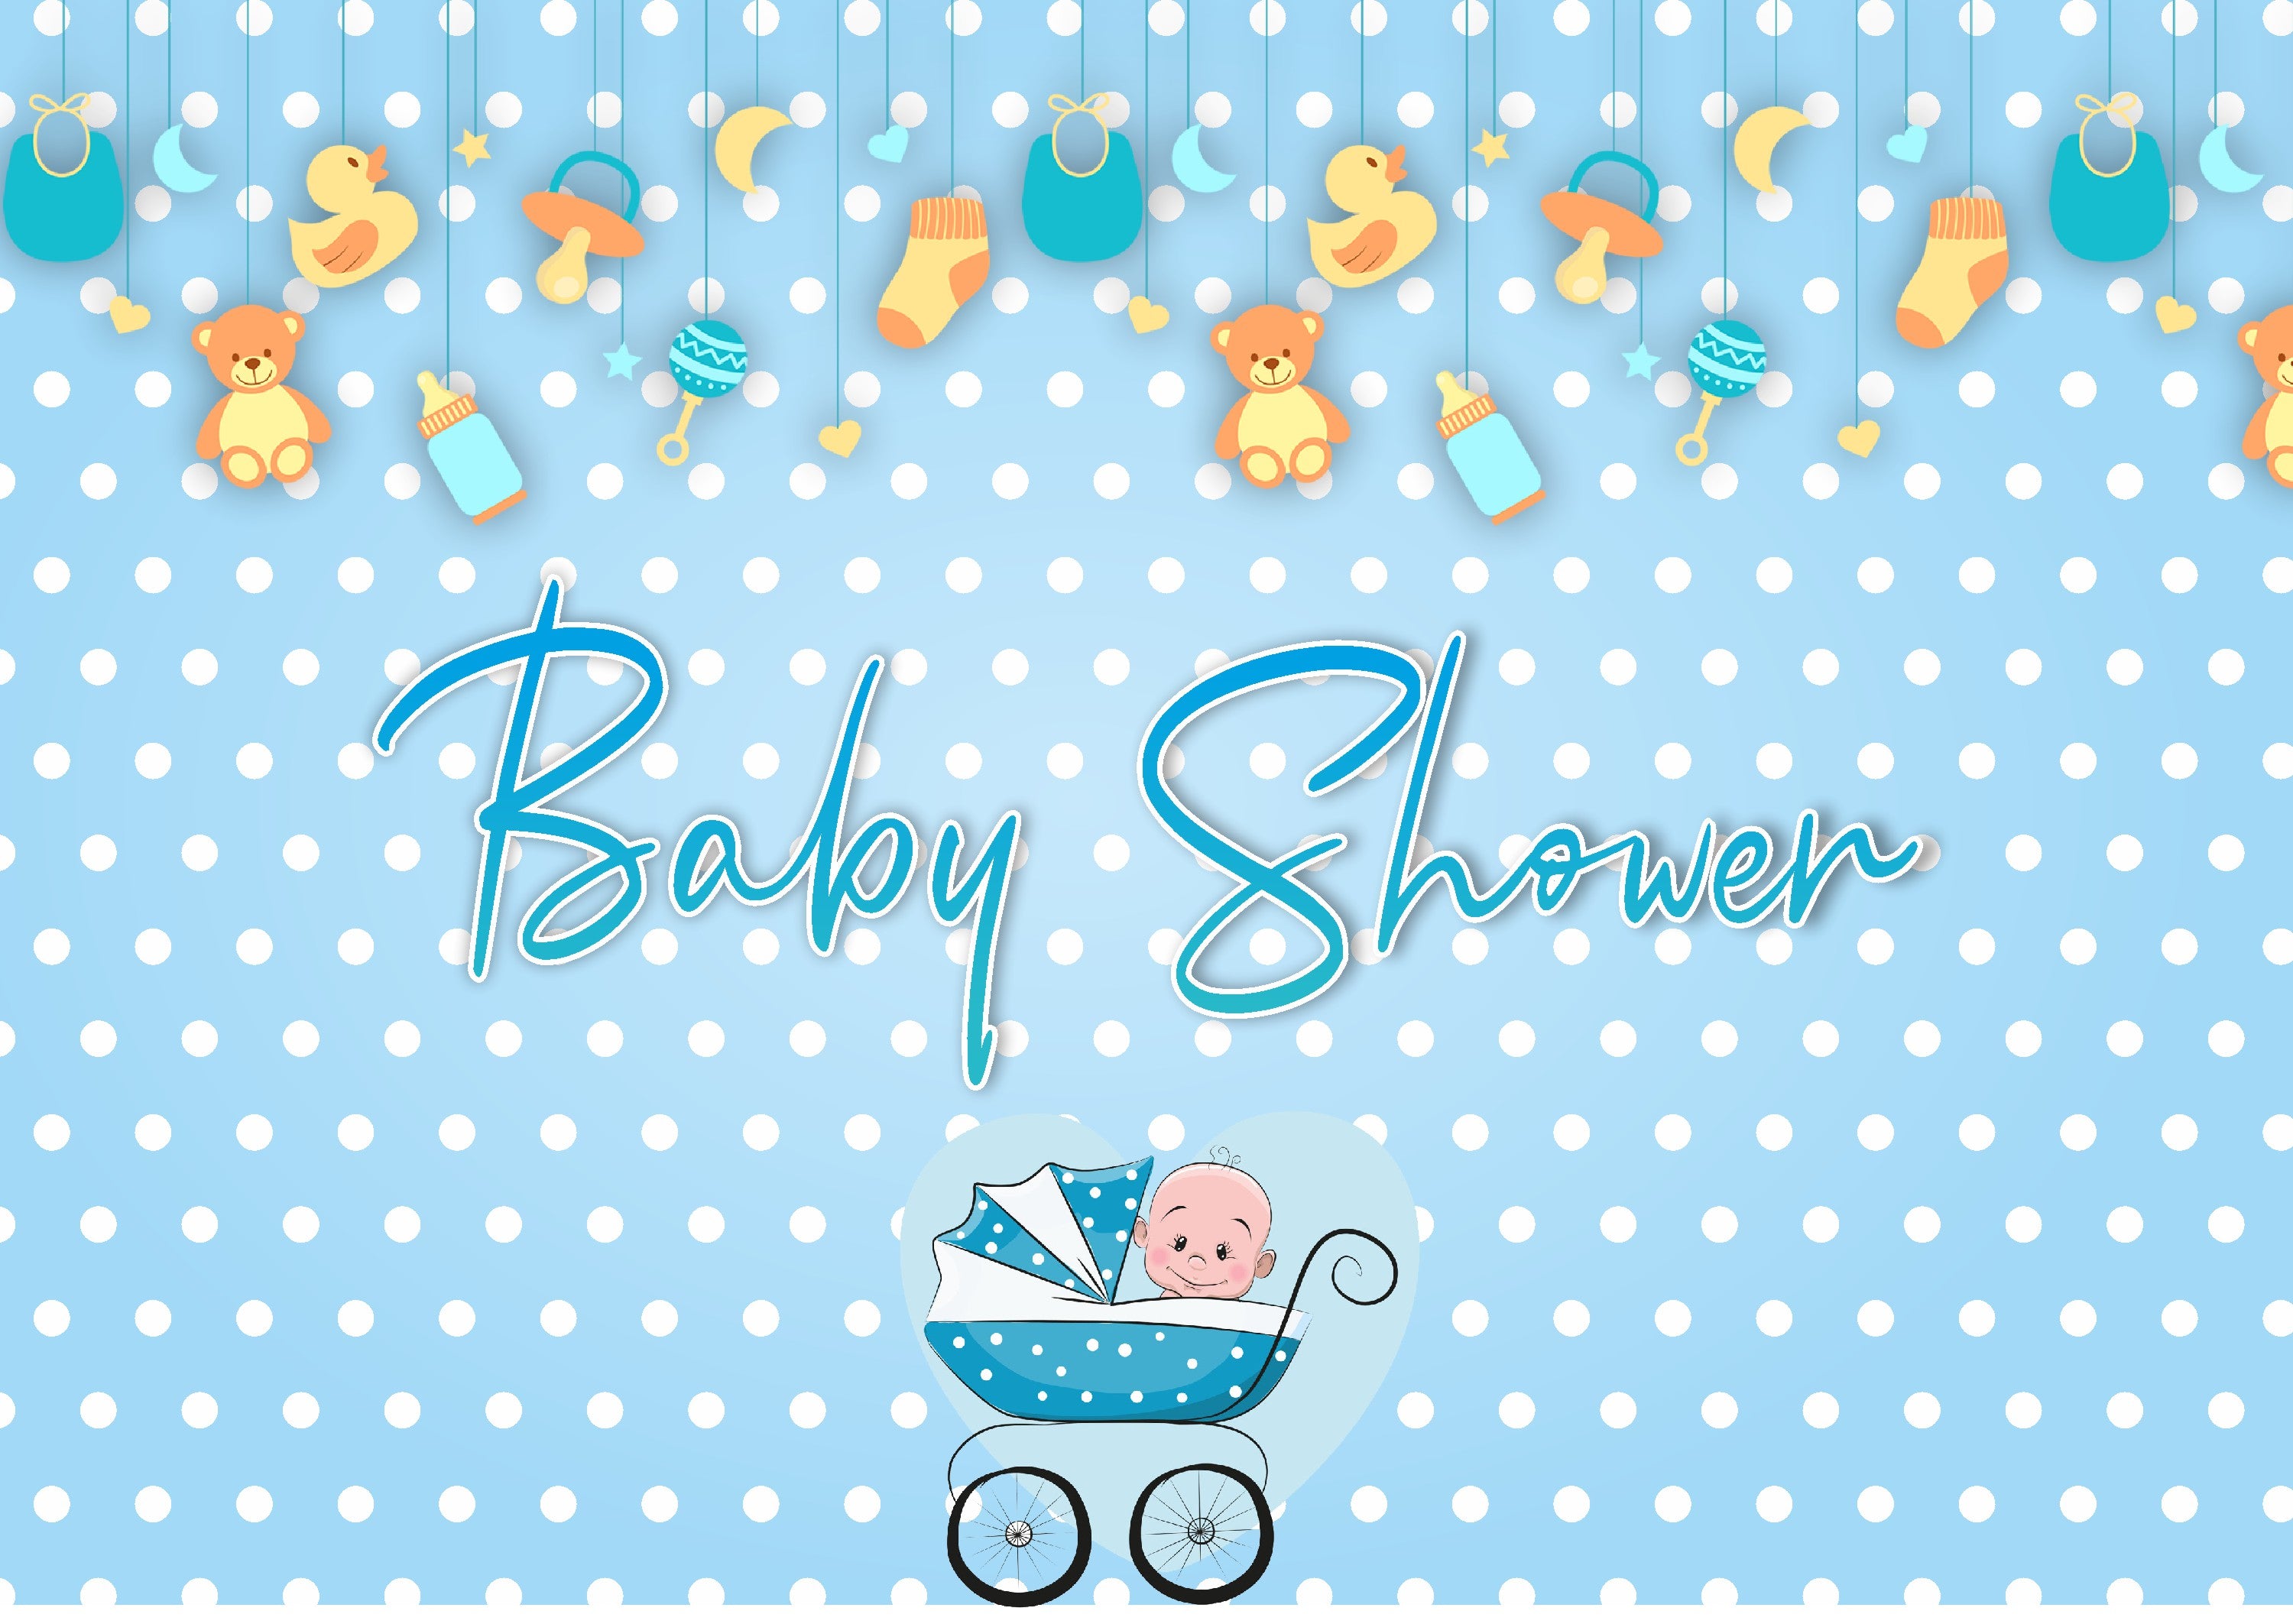 PSI Baby Shower Theme Backdrop